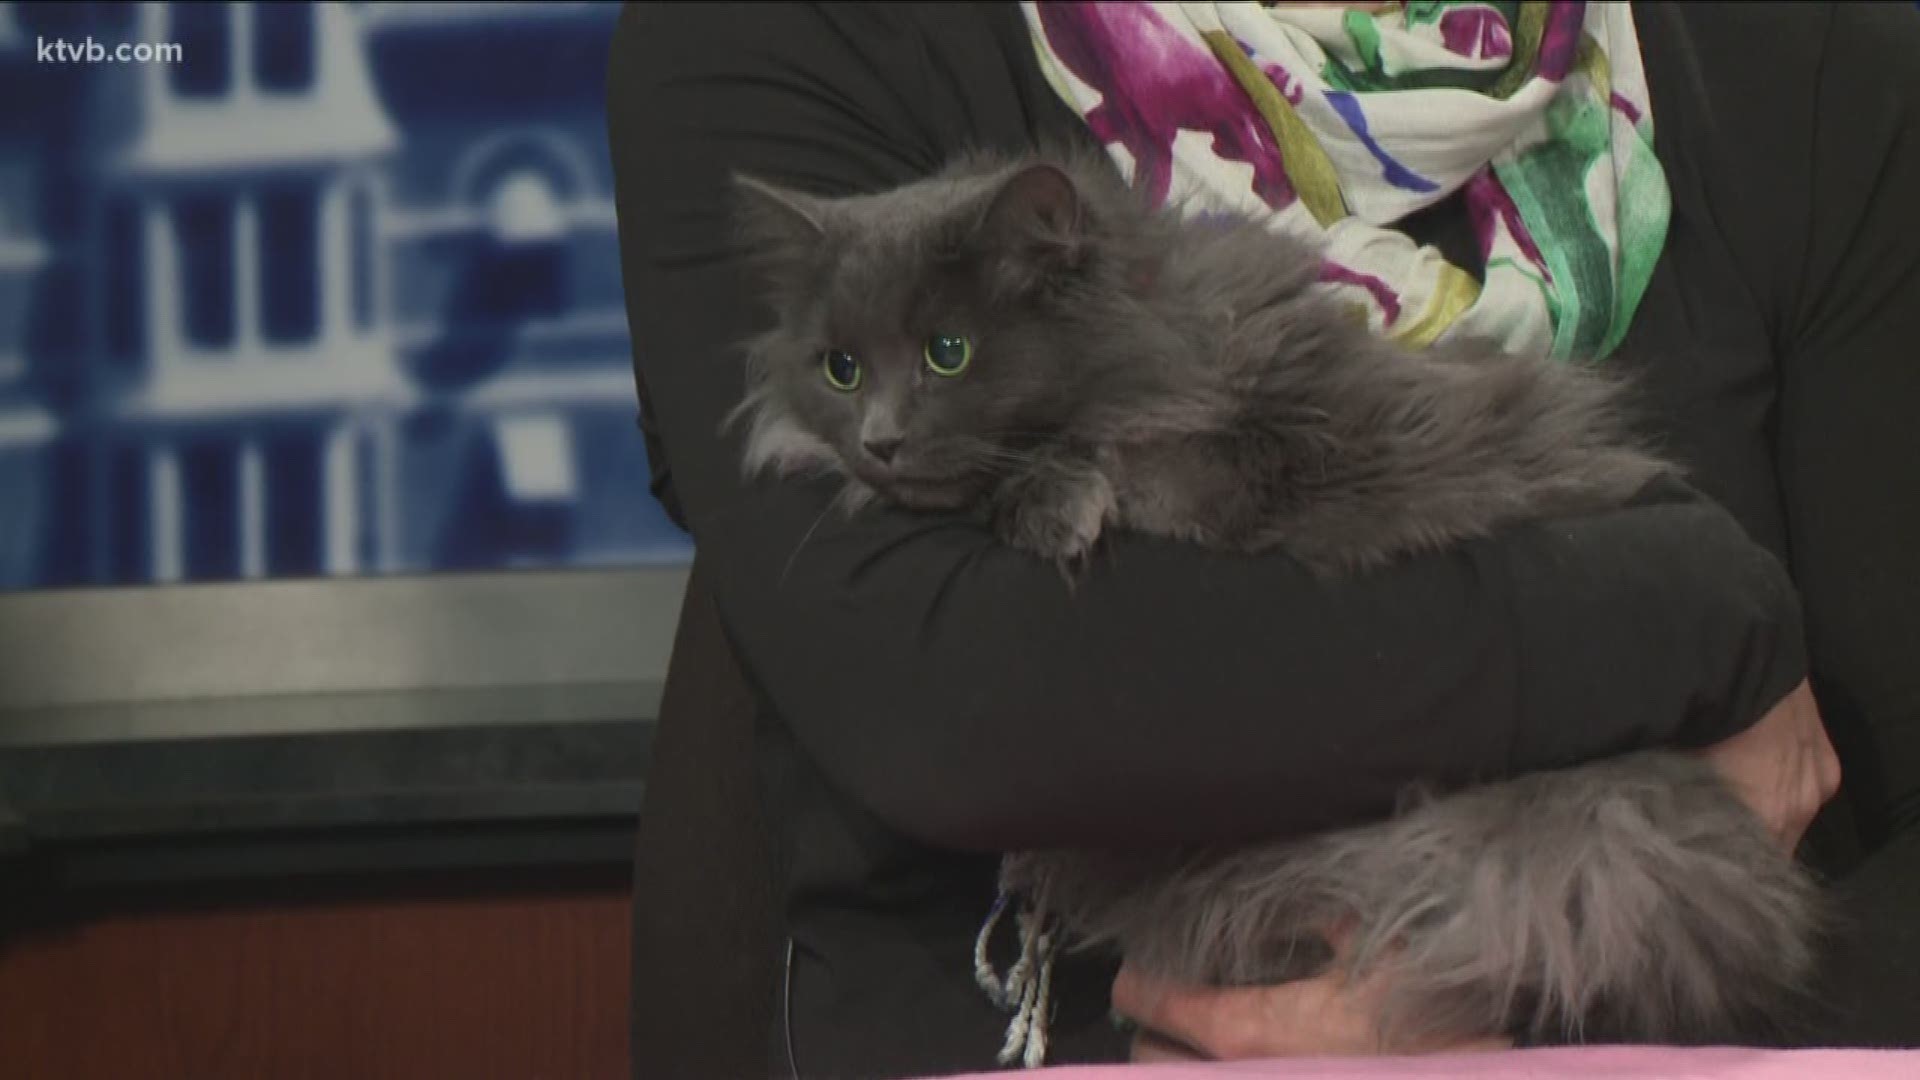 The Idaho Humane Society says Nikki should go to a home with no other pets.